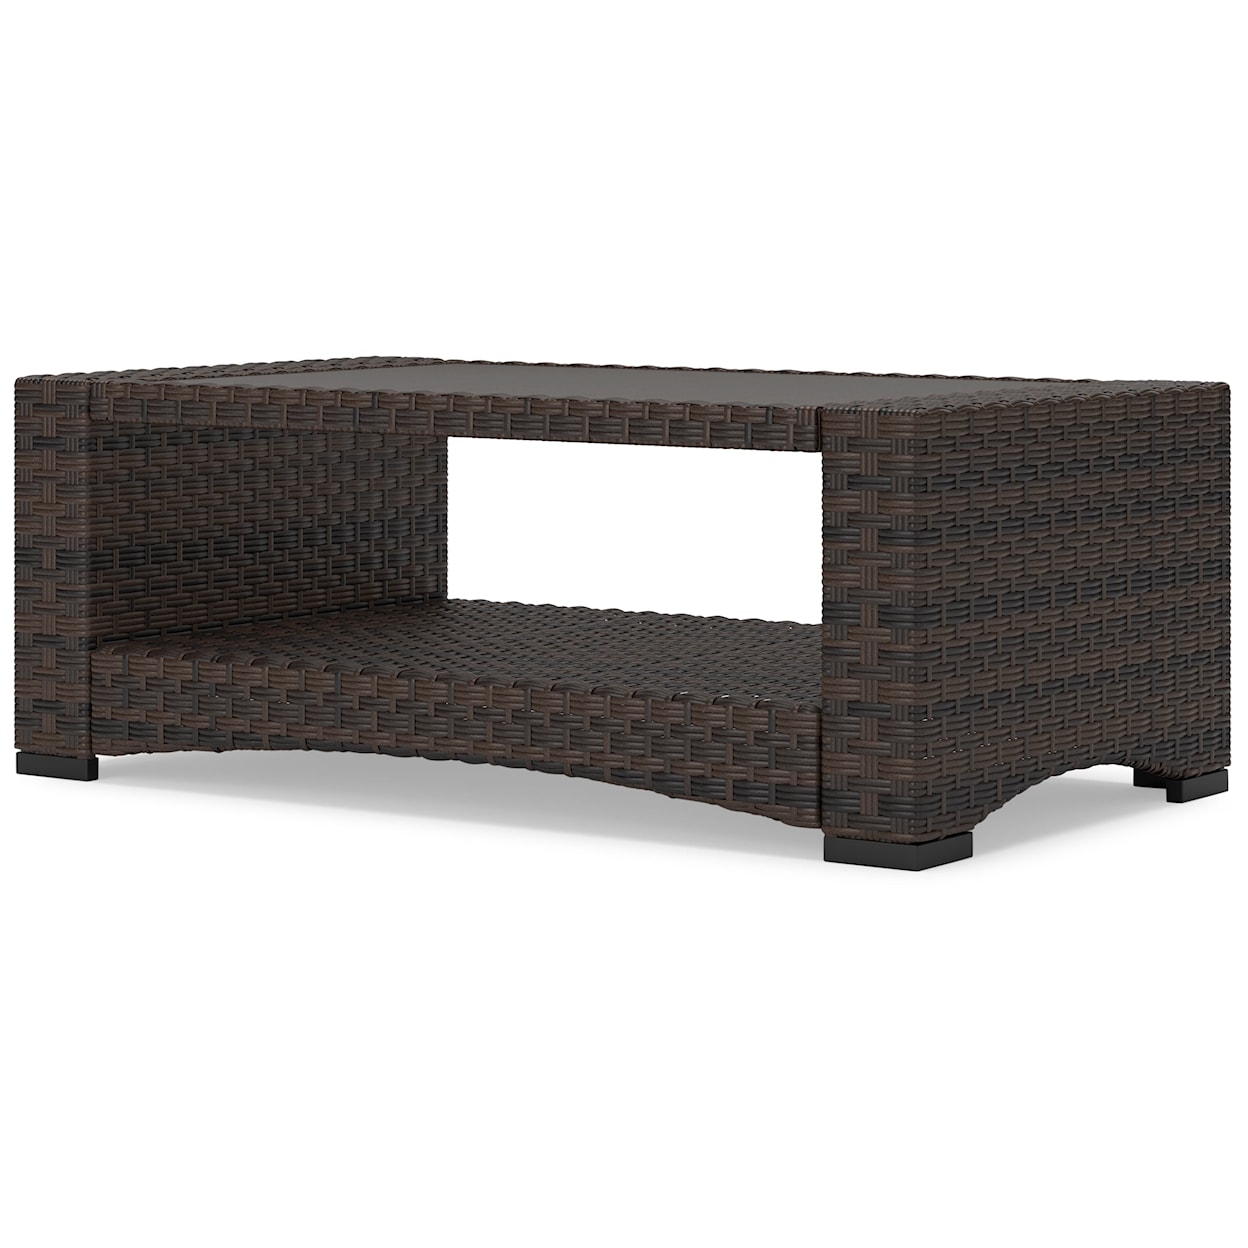 Signature Design by Ashley Windglow Outdoor Rectangular Coffee Table